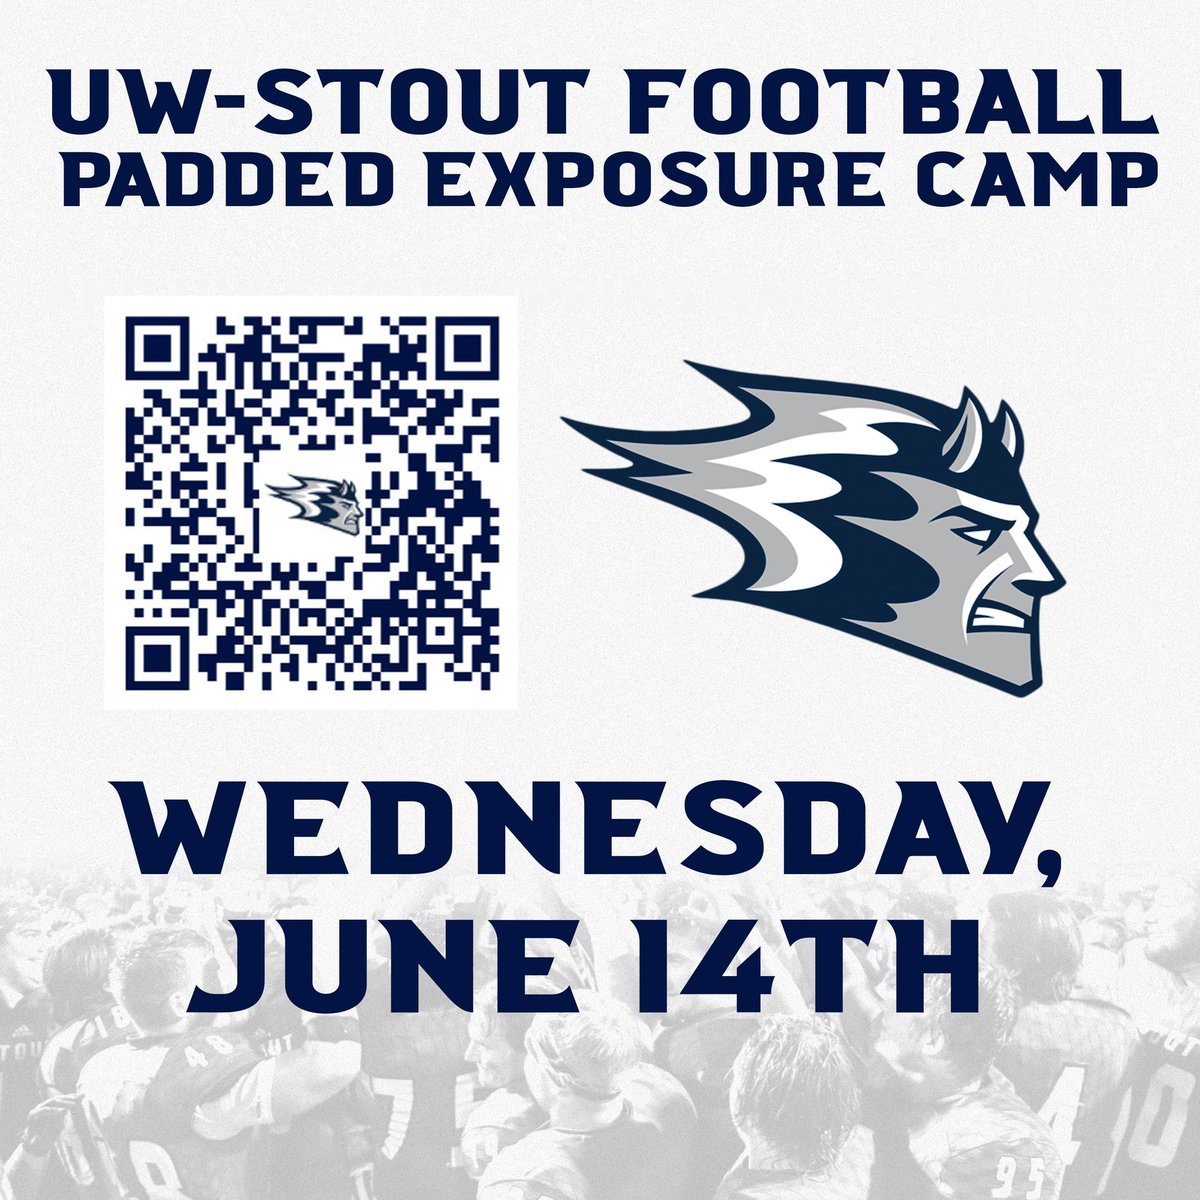 Recruits‼️Reminder to sign up for our Padded Exposure Camp. Scan the QR code or use the link below 👇 football.uwstoutsportscamps.com/football-padde…